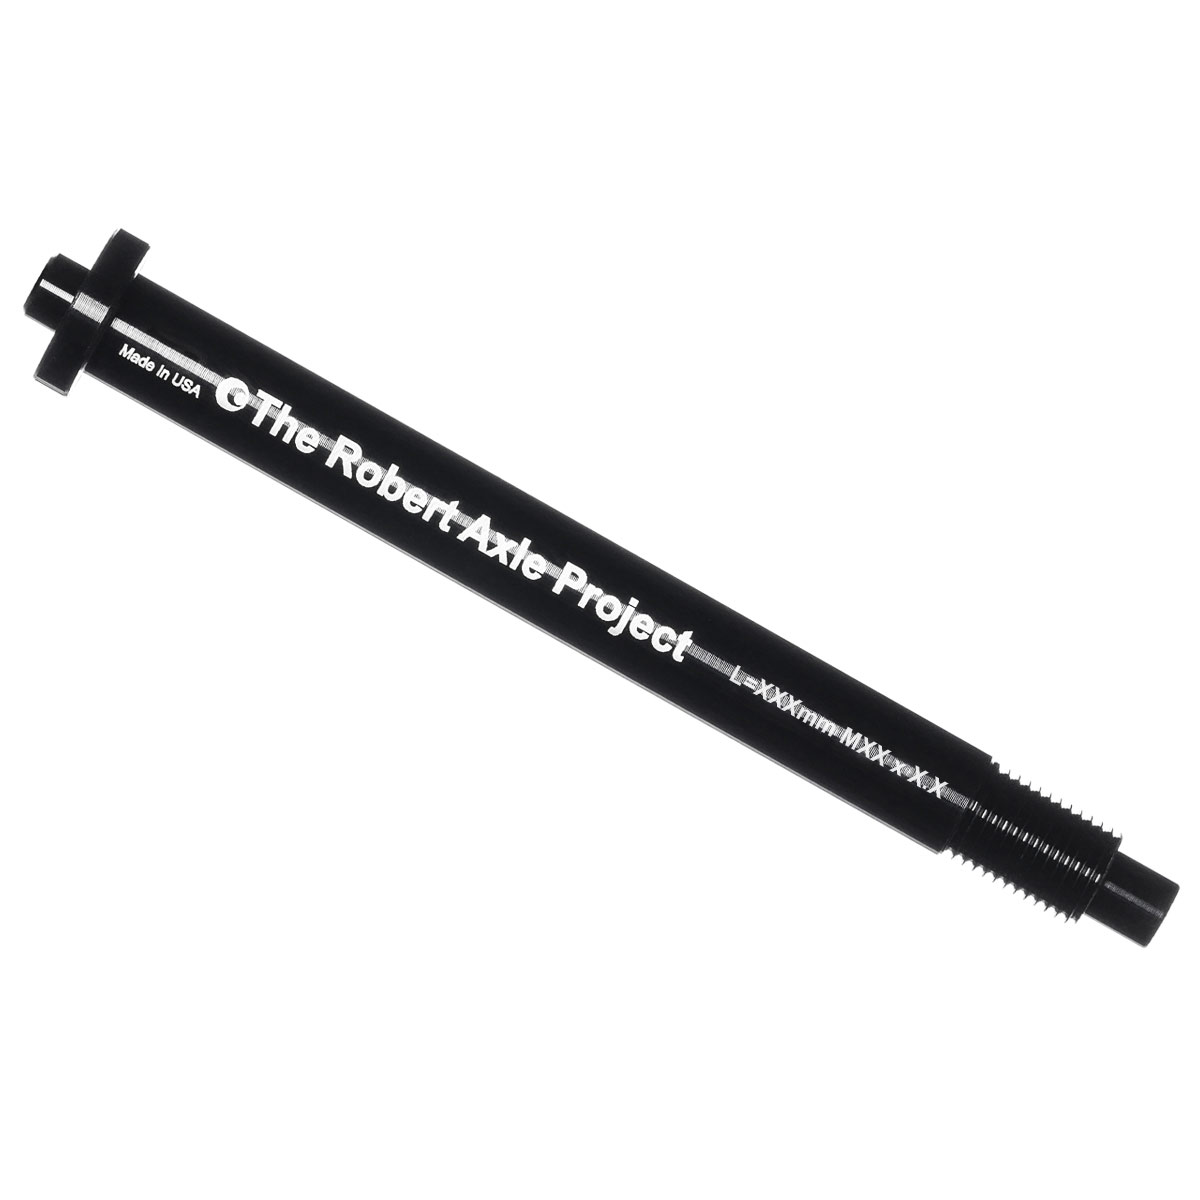 Front axle for mountain bike forks